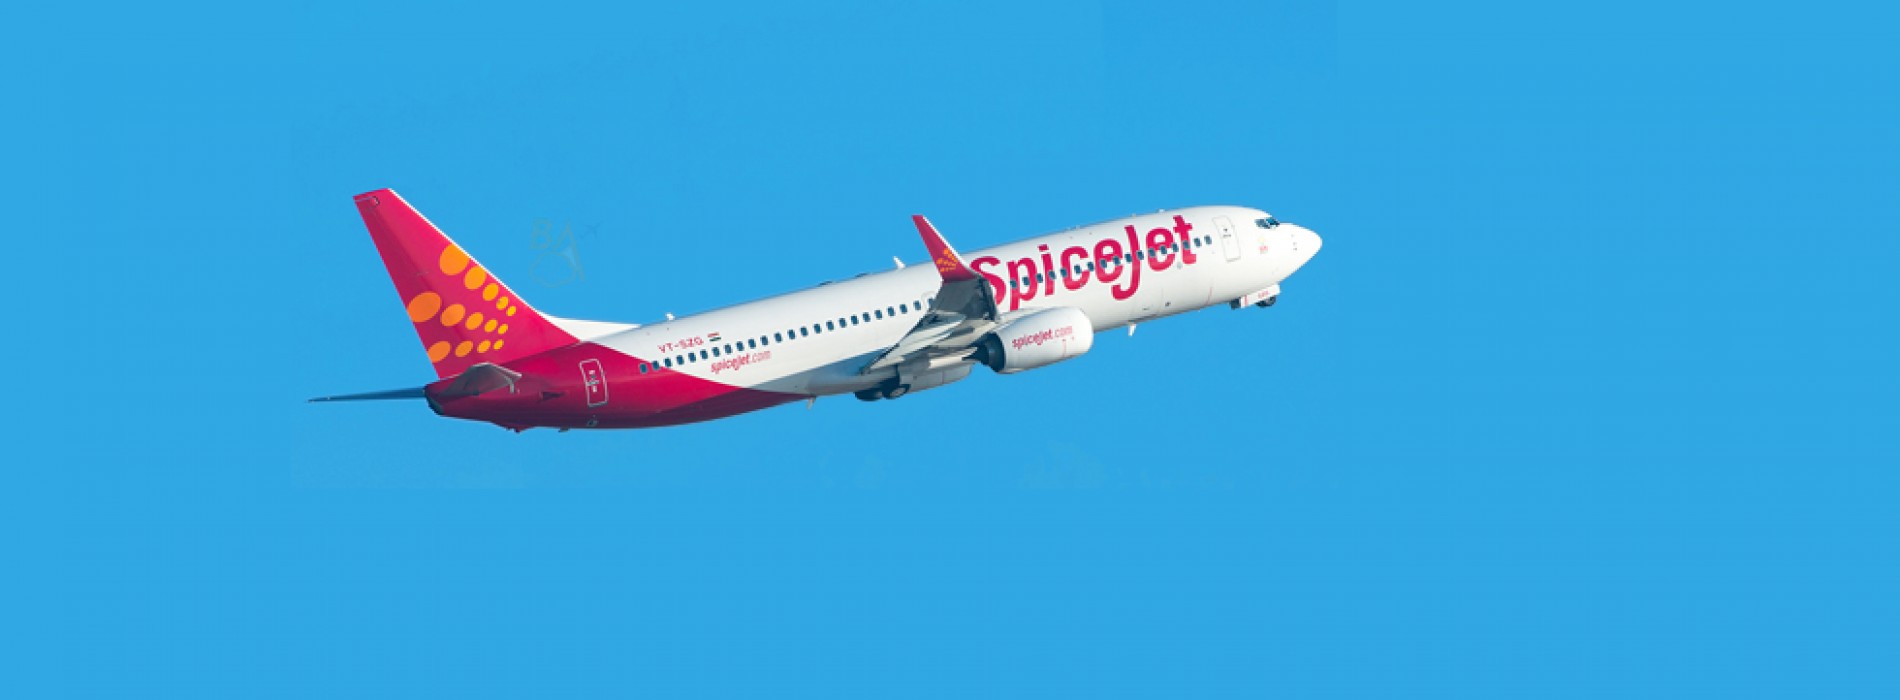 SpiceJet to buy up to 205 Boeing planes worth Rs 1.5 lakh crore